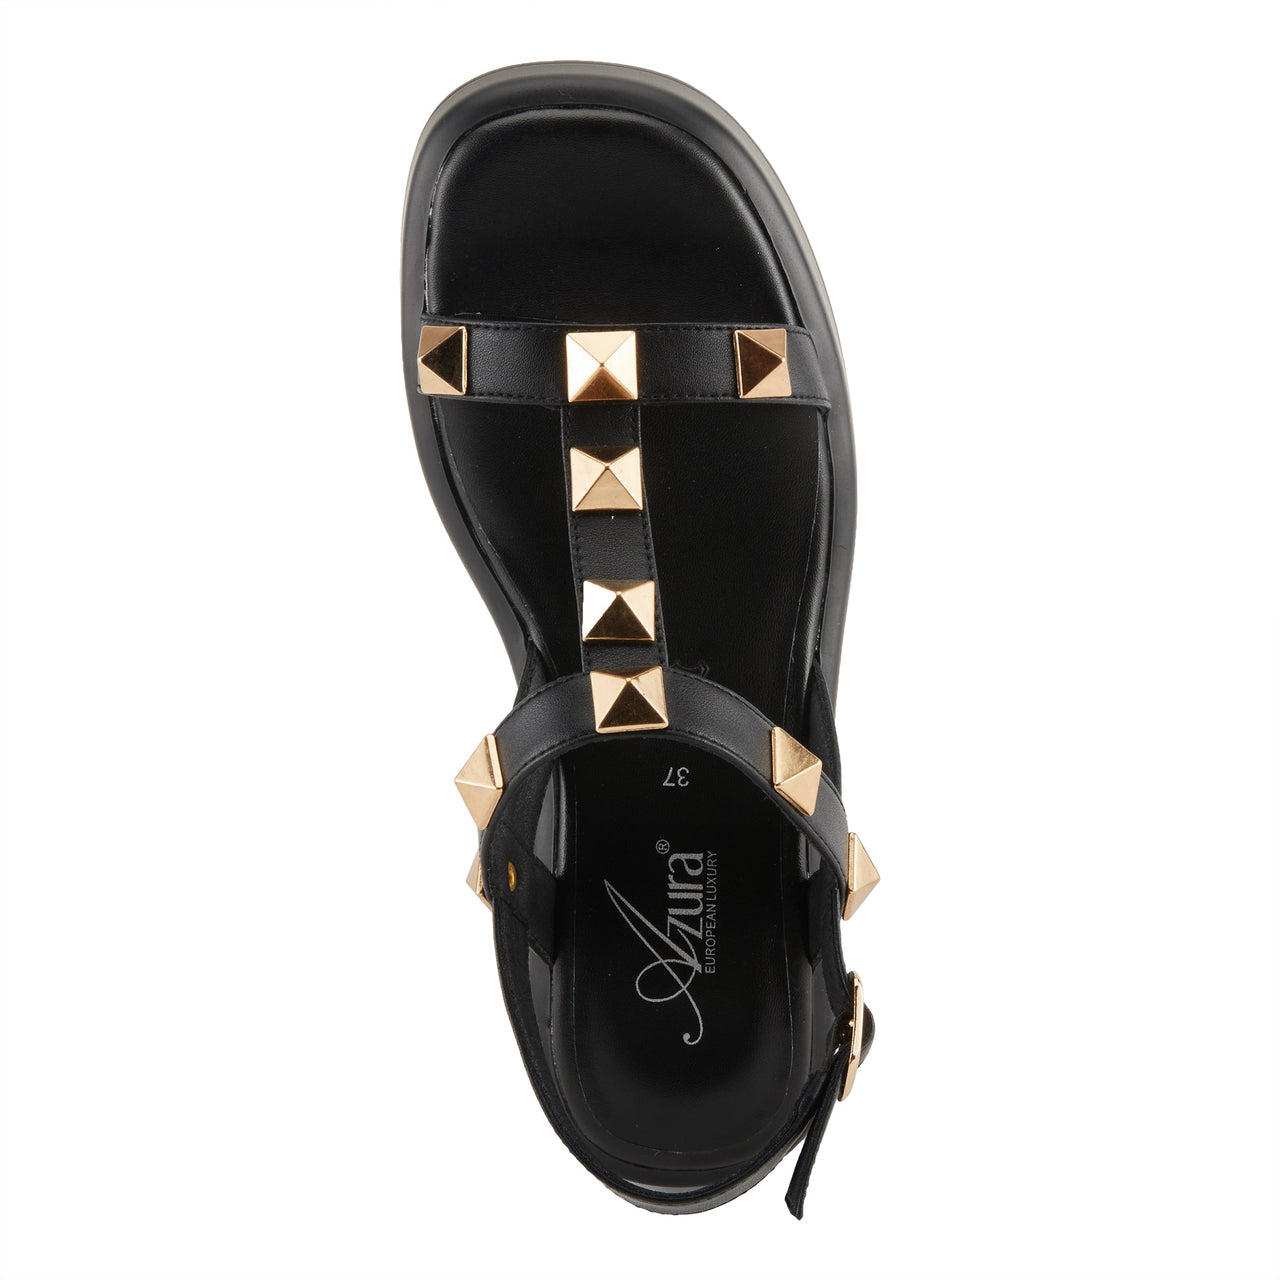 Women's Spring Step Shoes Azura Boogierock Sandals in elegant black design, perfect for casual outings and summer strolls